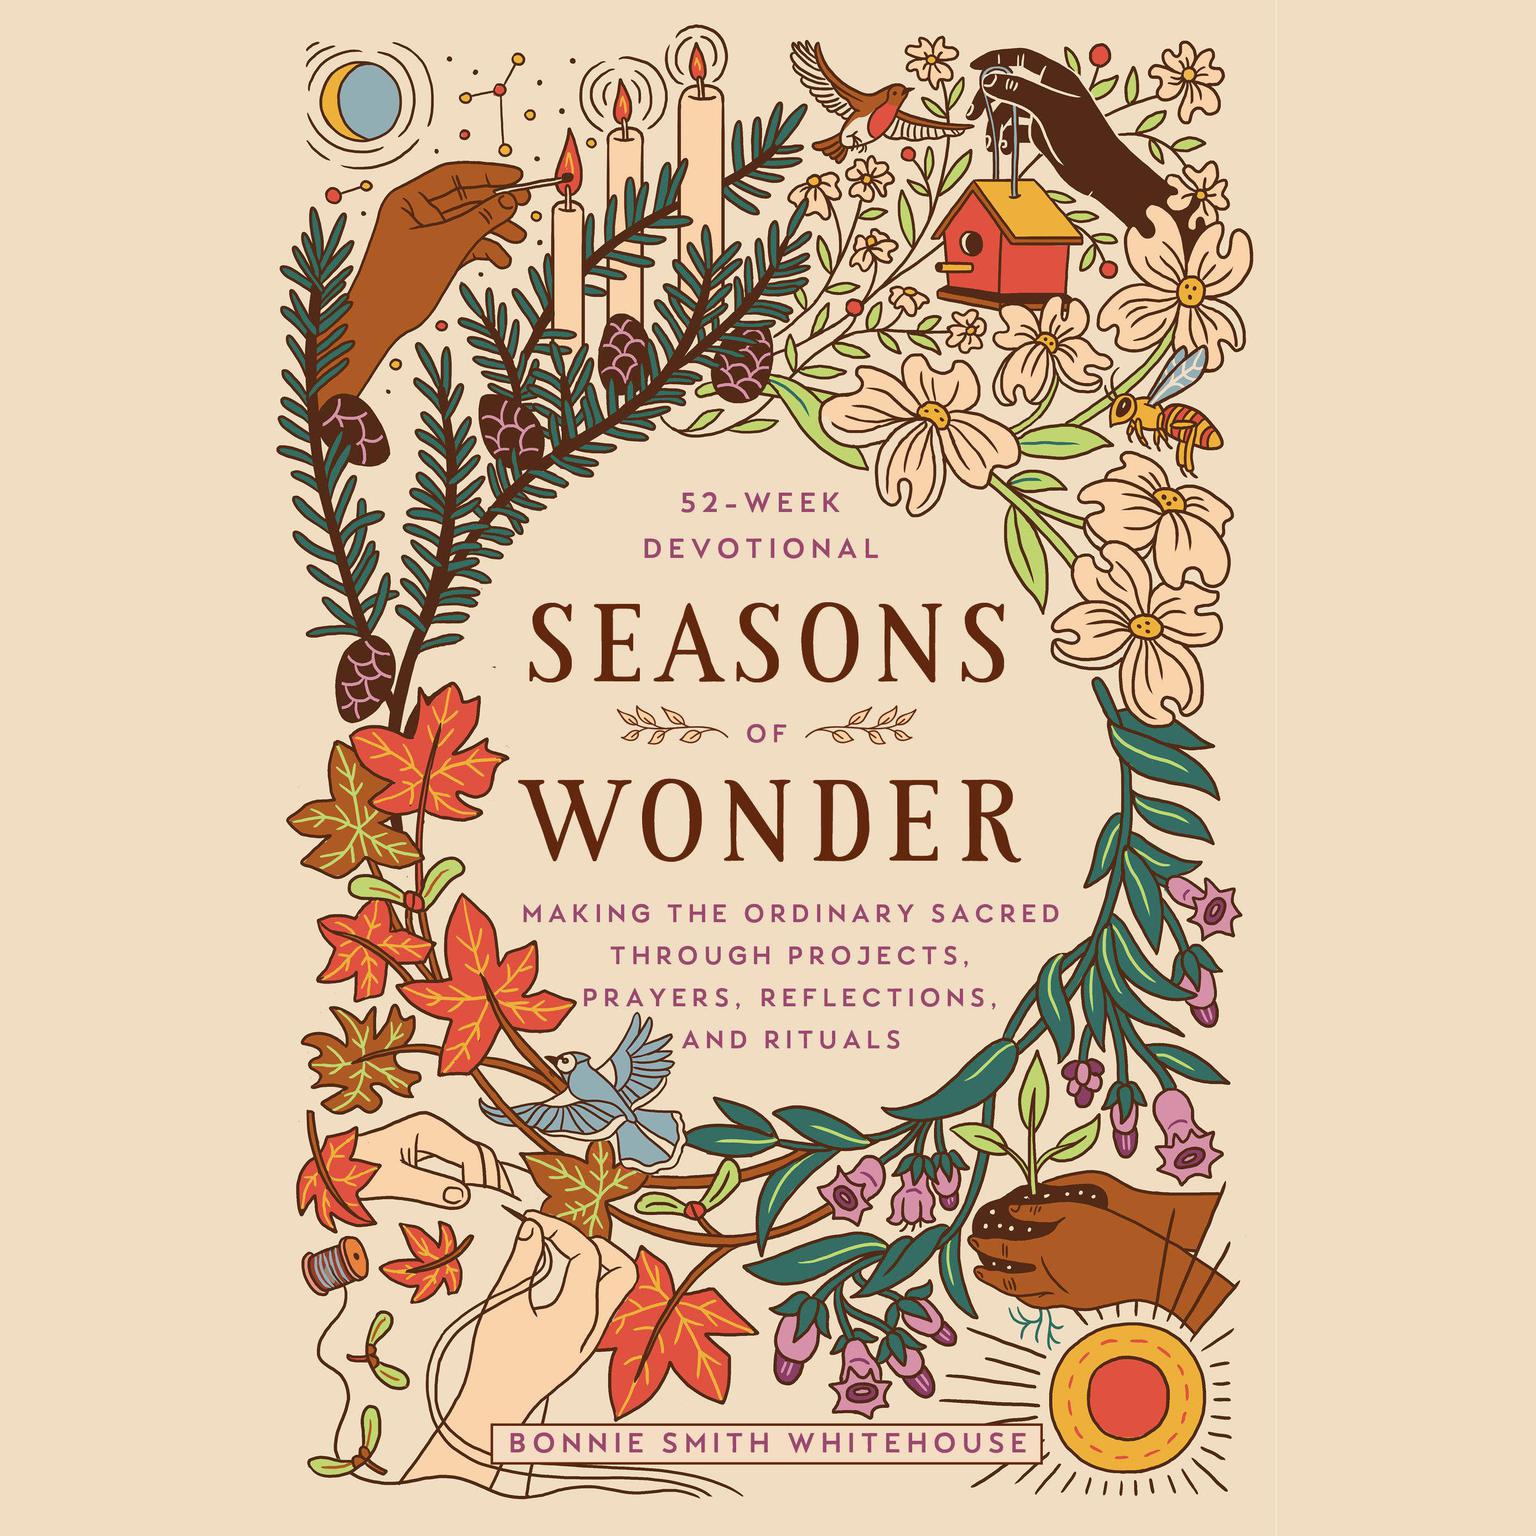 Seasons of Wonder: Making the Ordinary Sacred Through Projects, Prayers, Reflections, and Rituals: A 52-week devotional Audiobook, by Bonnie Smith Whitehouse